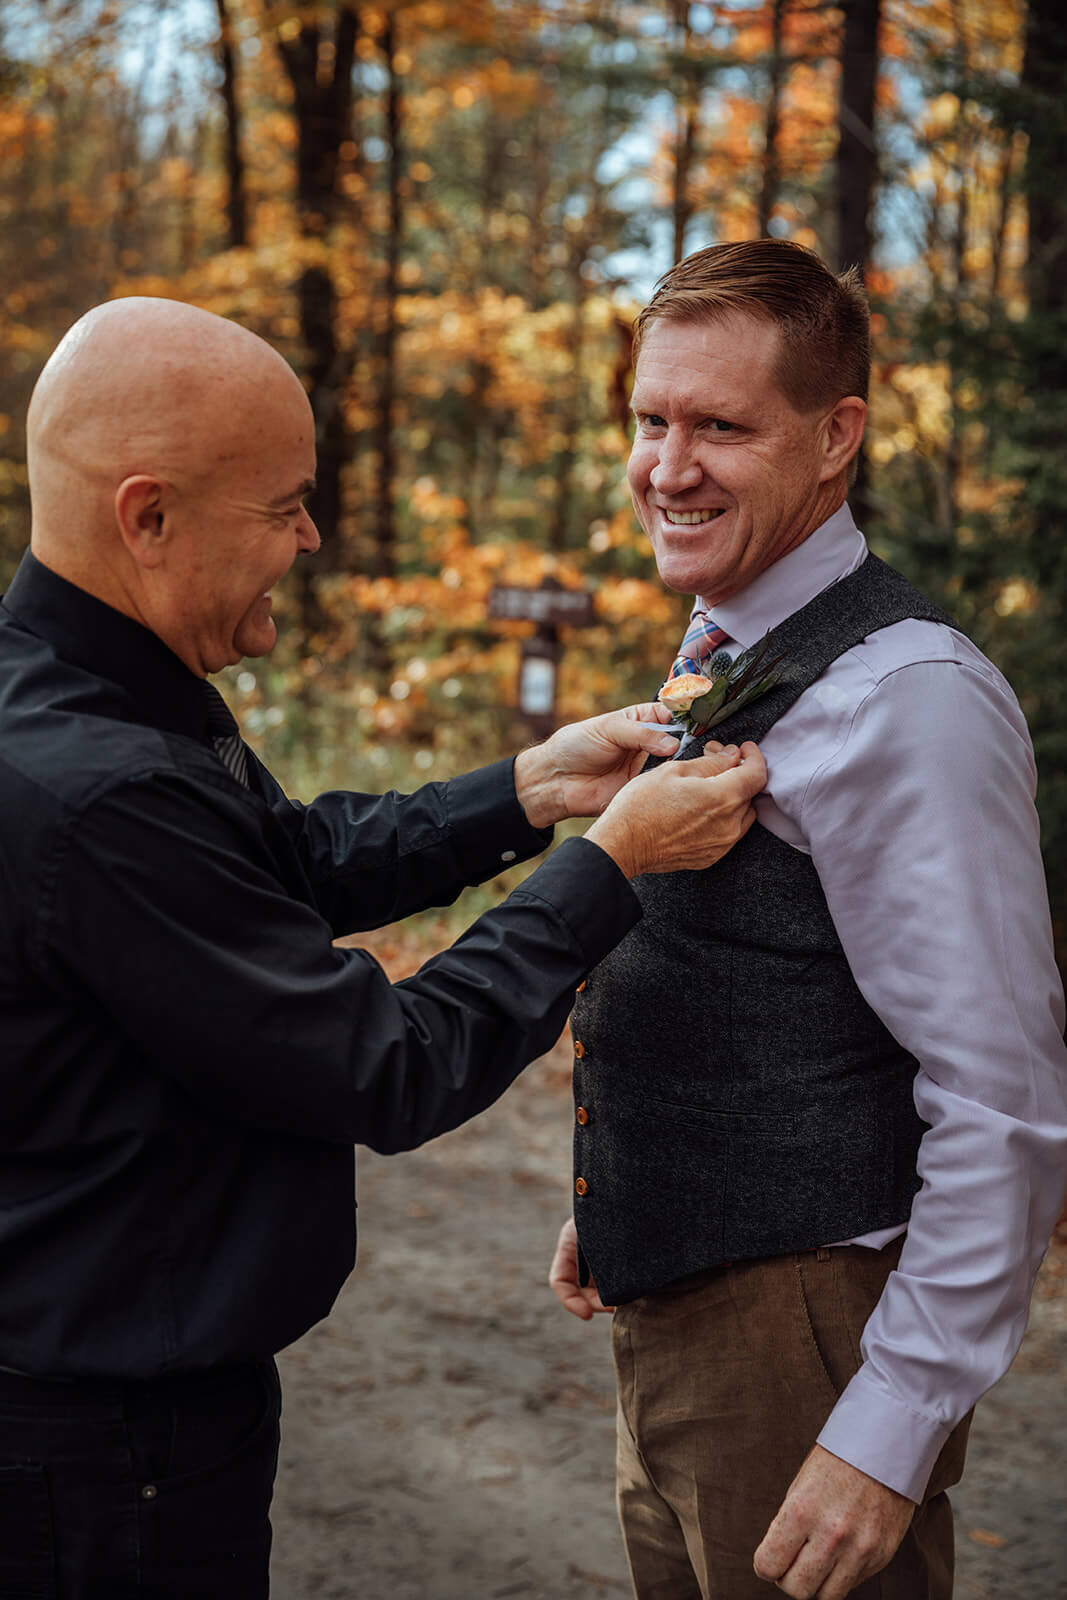  Officiant pins on the groom’s boutonnière as the couple prepares to hike to their elopement ceremony location  